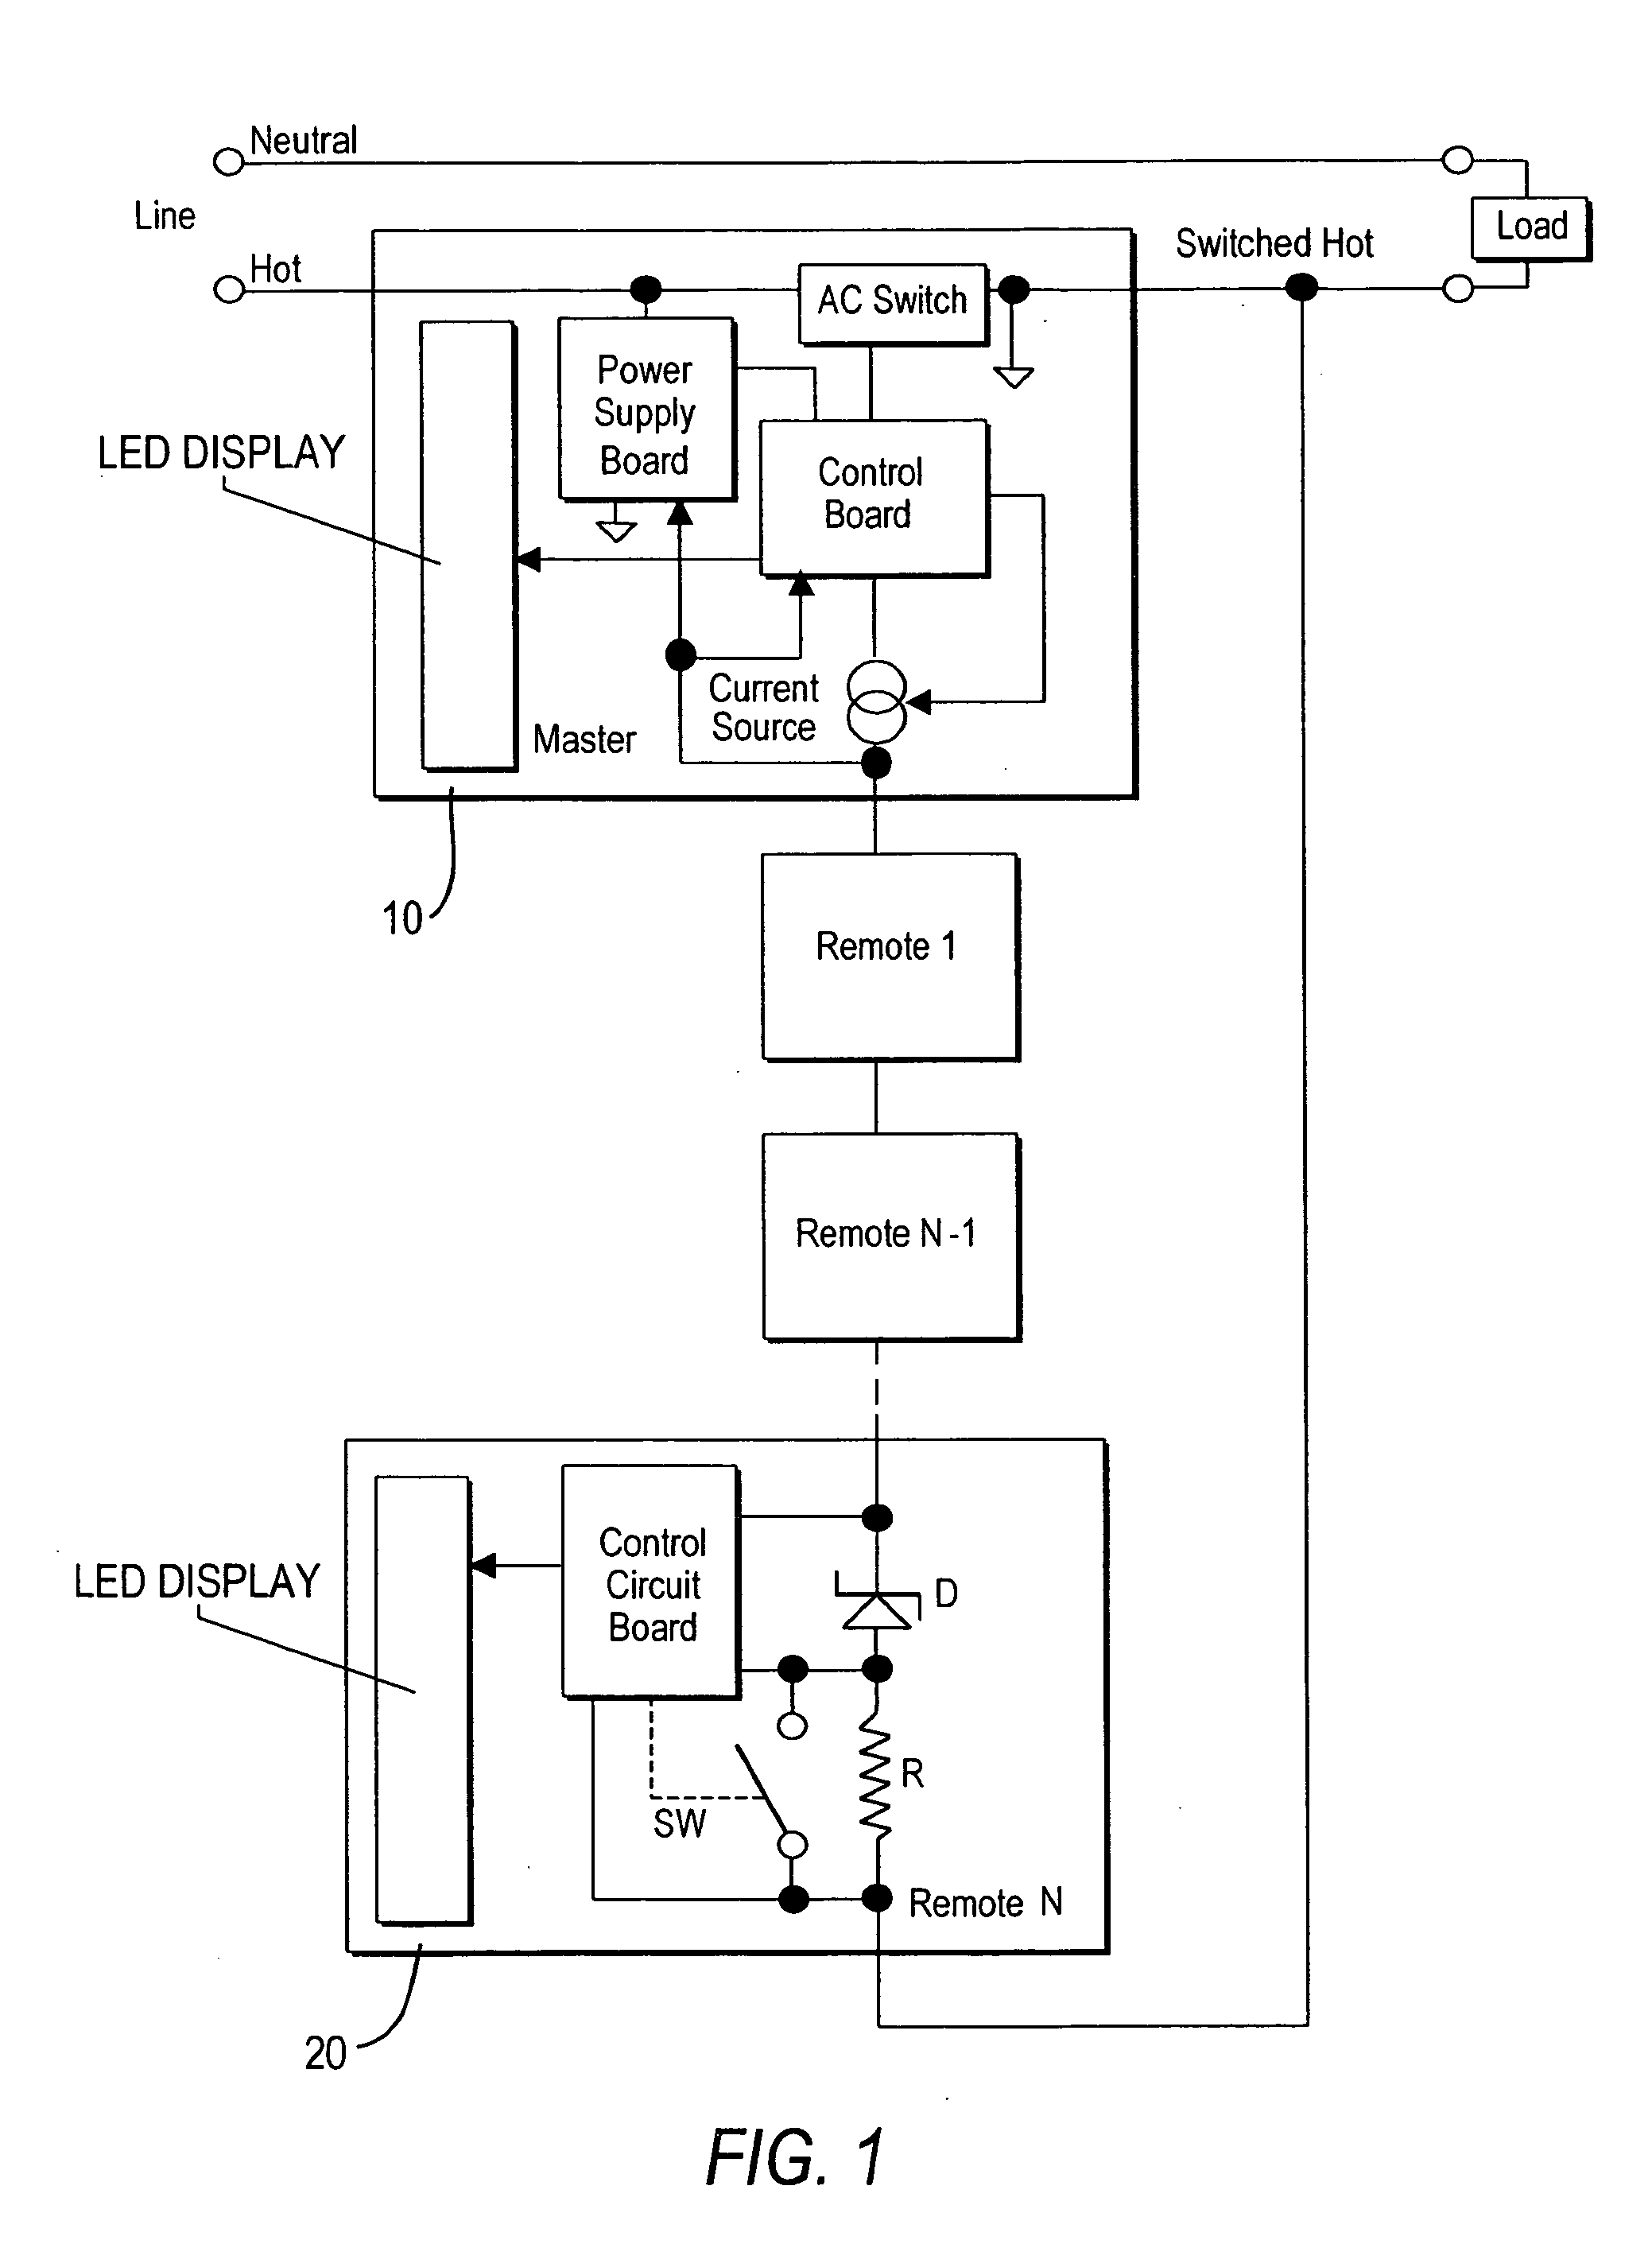 Dimmer control system with memory